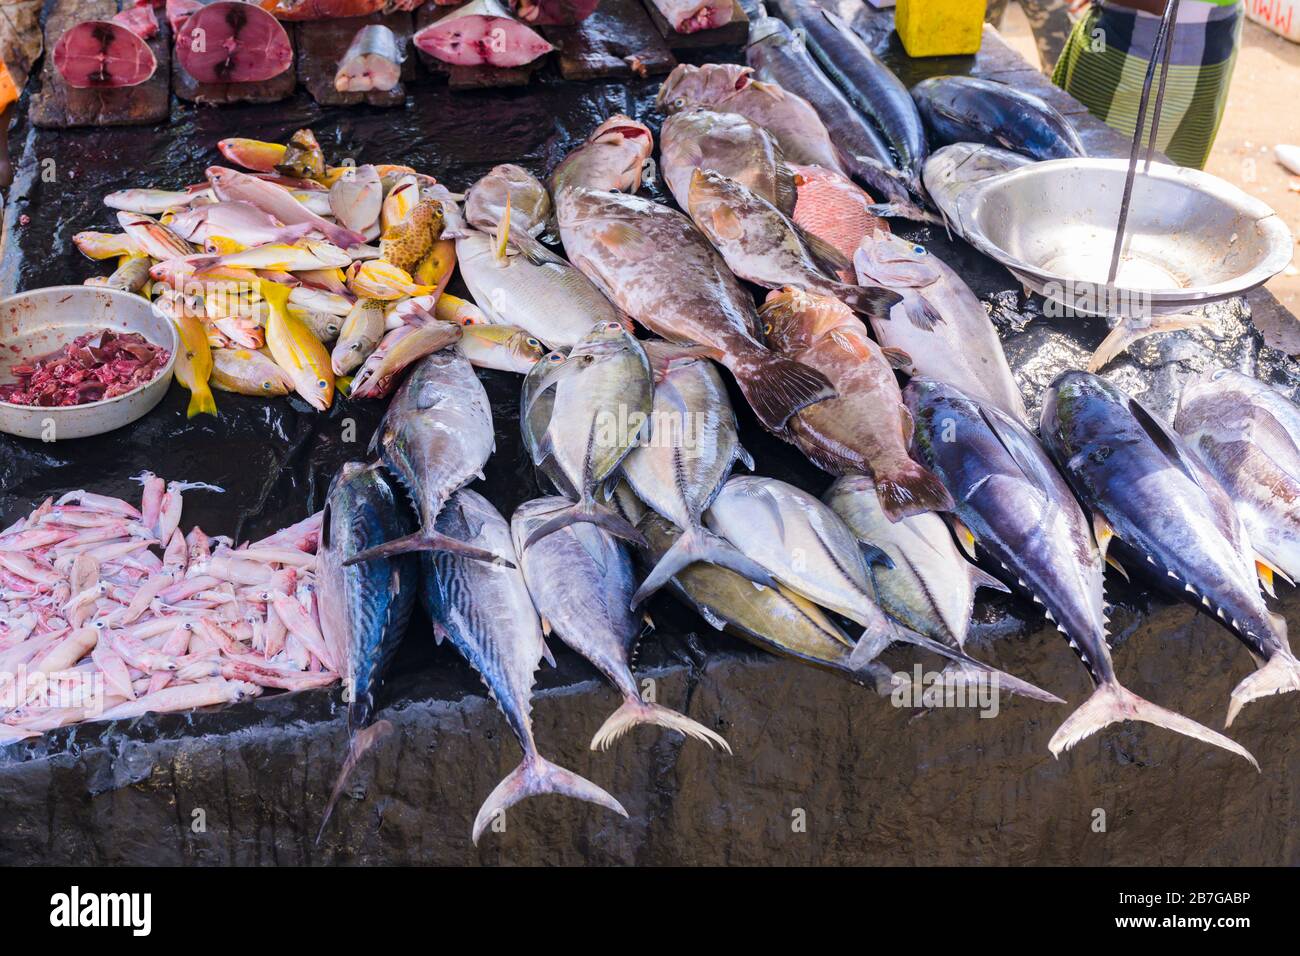 South Asia Sri Lanka Fort Galle colonial town centre old ancient harbour port fresh fish stall mullet bream tuna scales Stock Photo